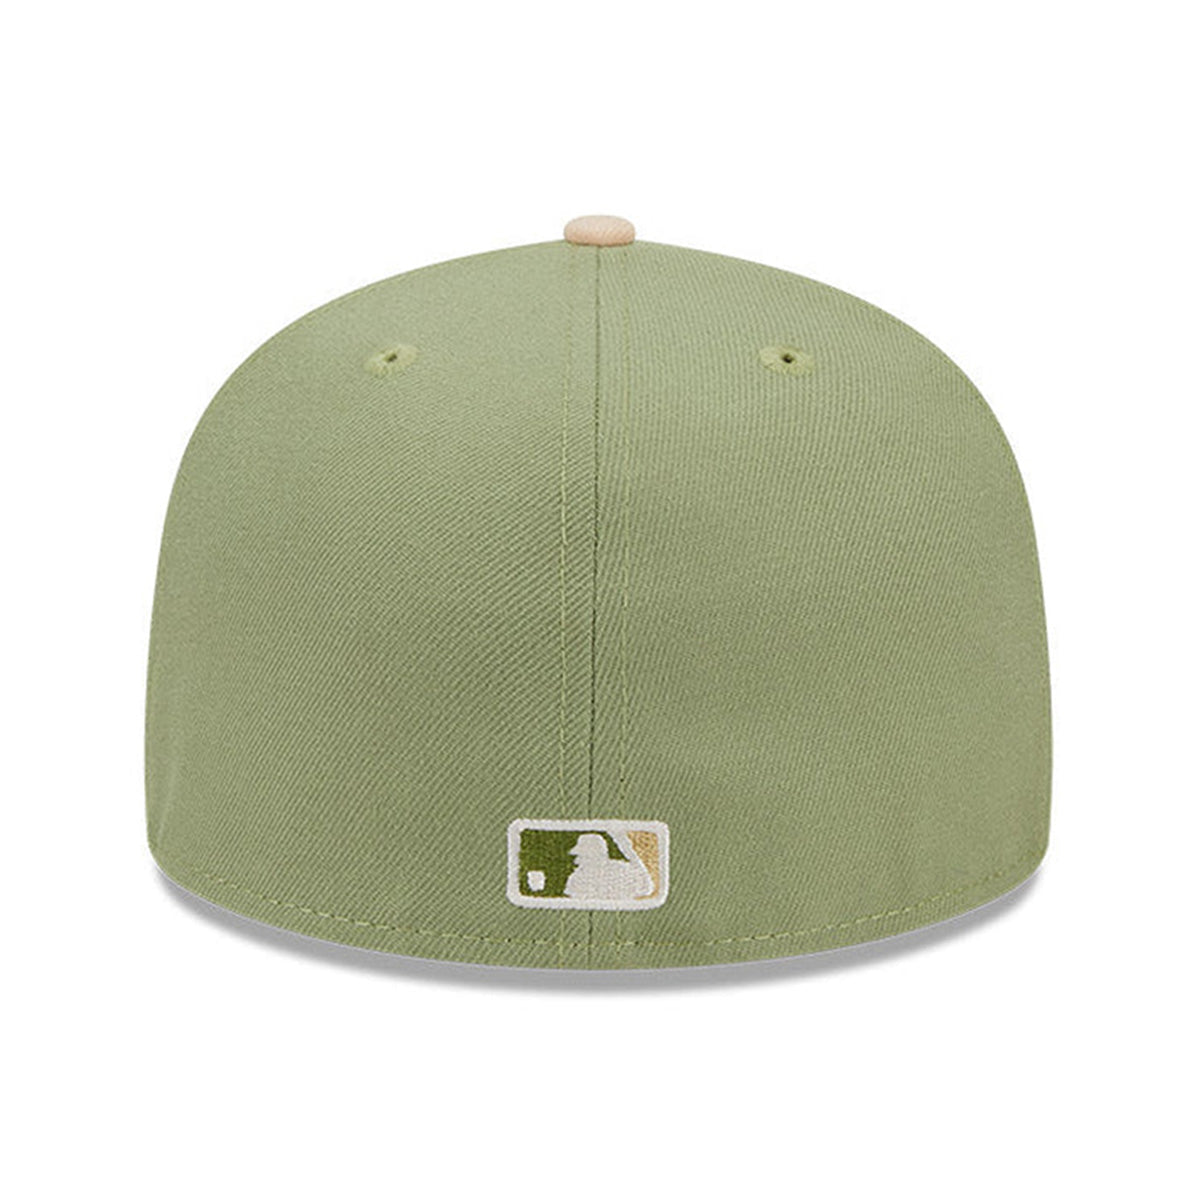 NEW ERA Boston Red Sox -59FIFTY Thermal Front WS04 WH/P.GRE/P.BEI【14132557】